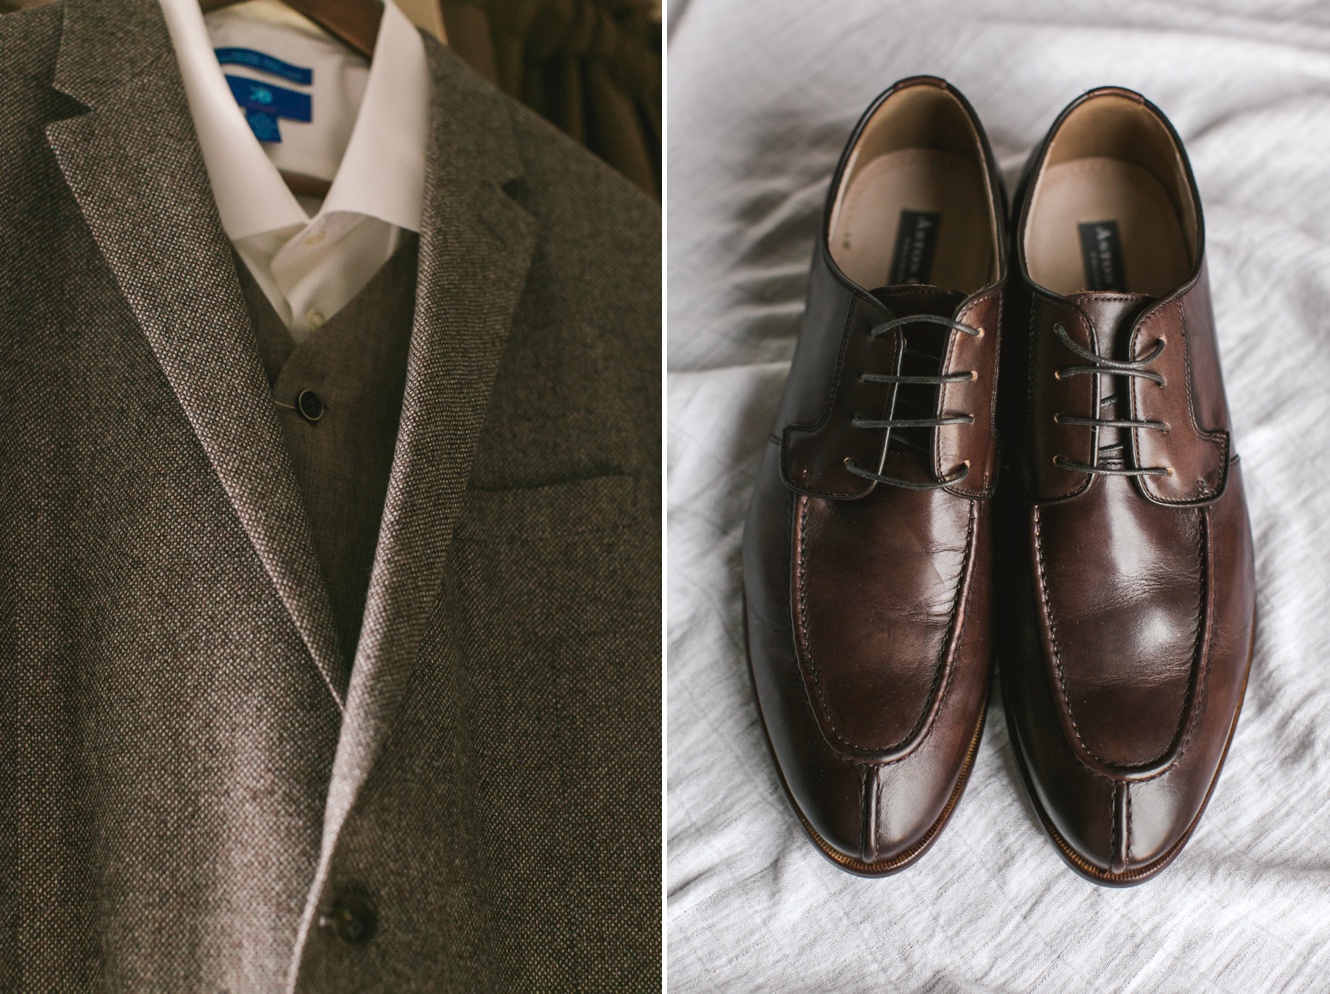 Tweed suit and vest and leather shoes for the groom's wedding attire